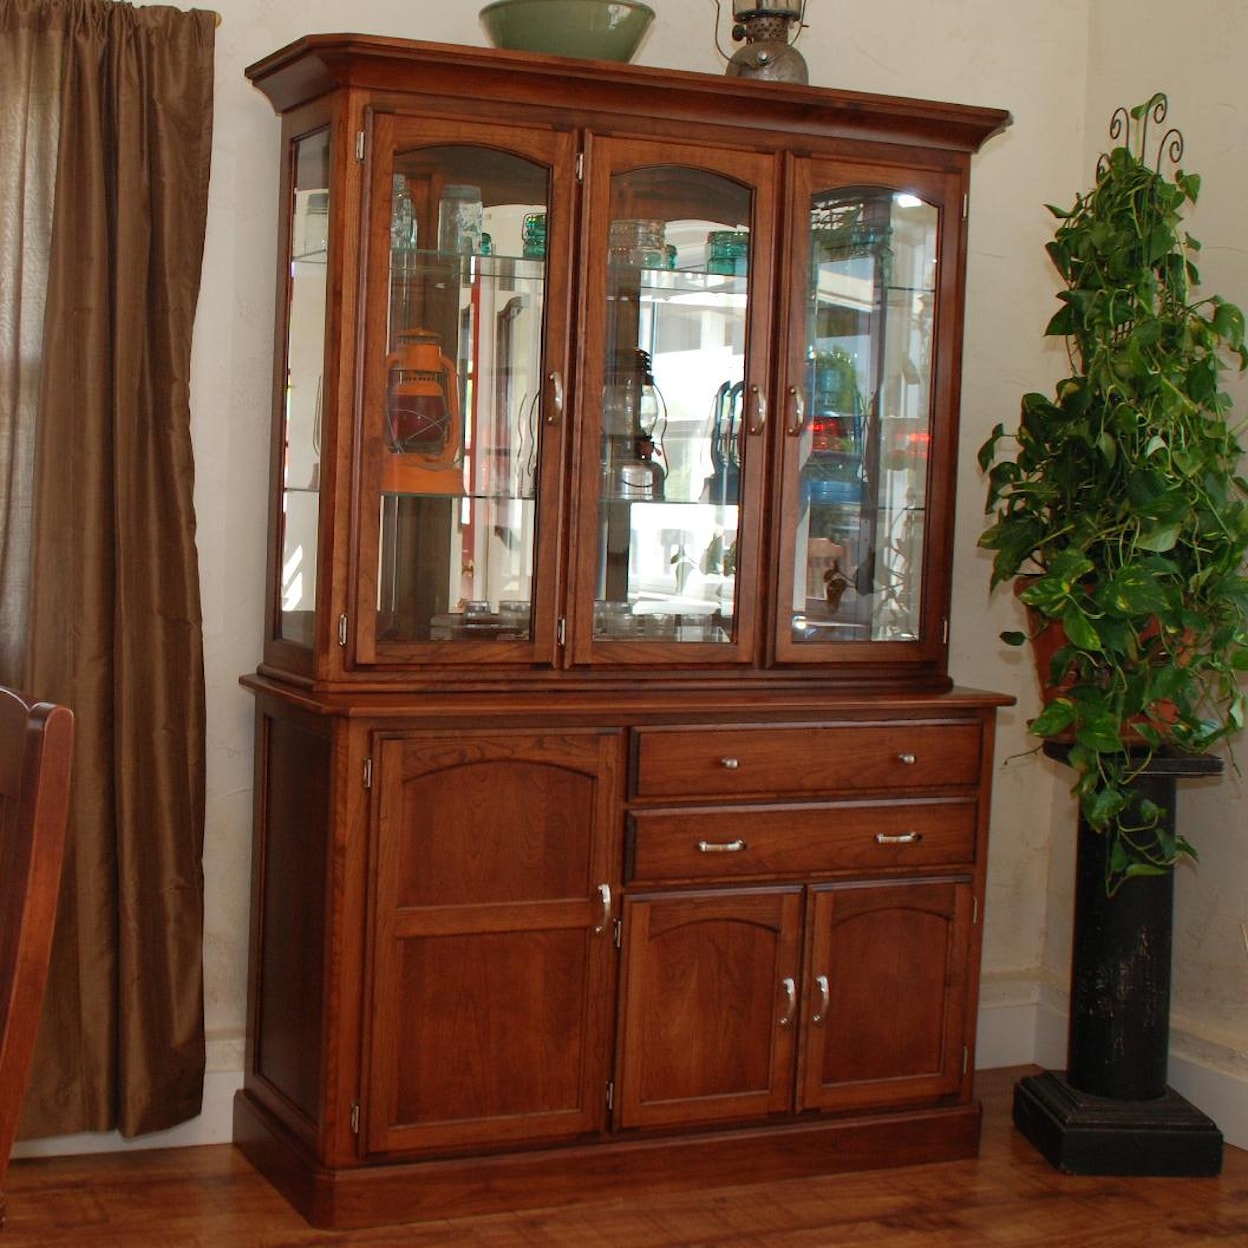 Oakwood Industries Casual Dining Newport Hutch and Buffet